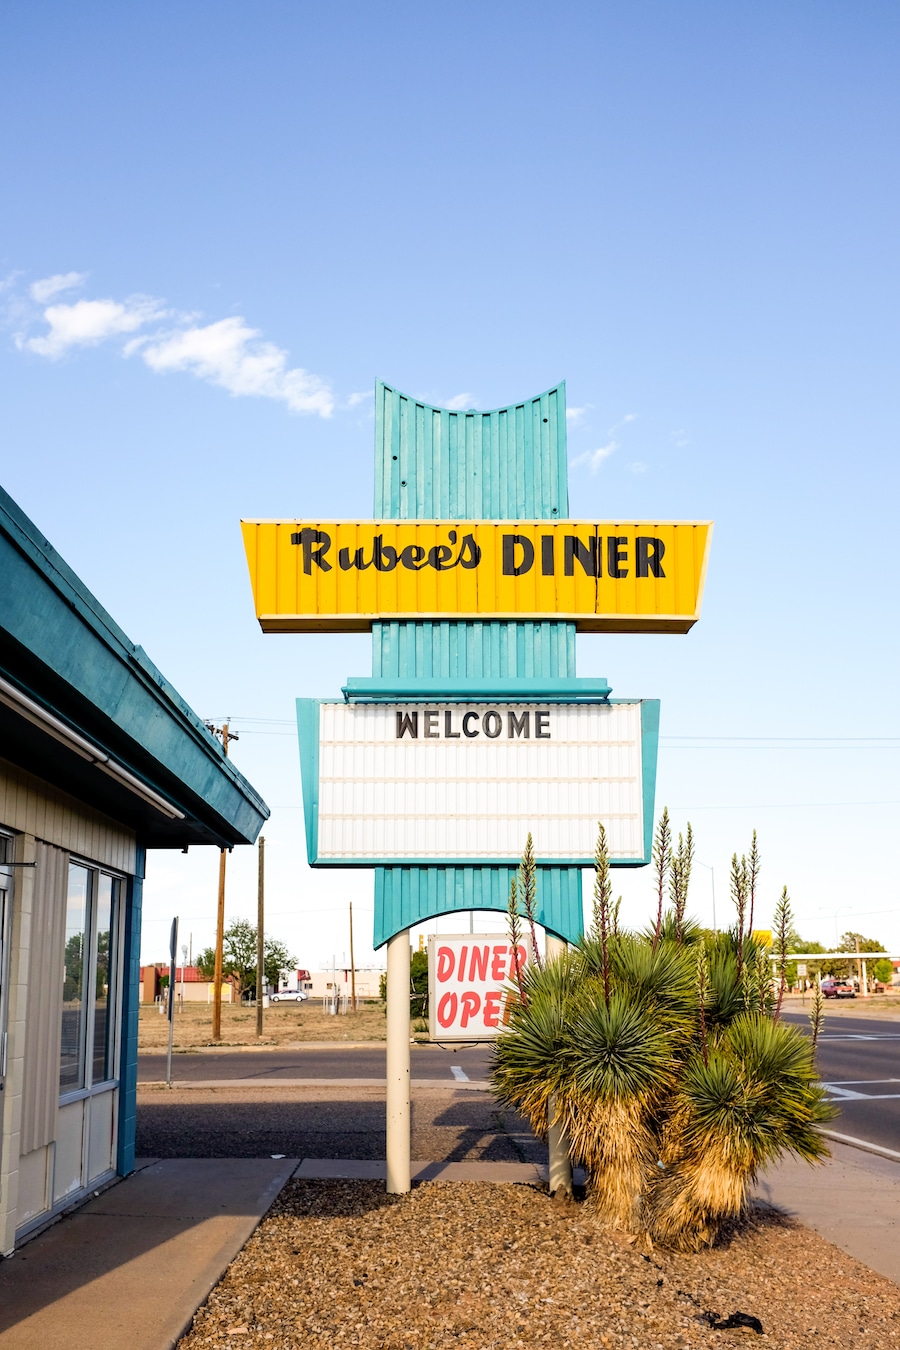 Route 66 Abandoned Ranch House cafe and its vintage neon sign on Route 66 in Tucumcari New Mexico